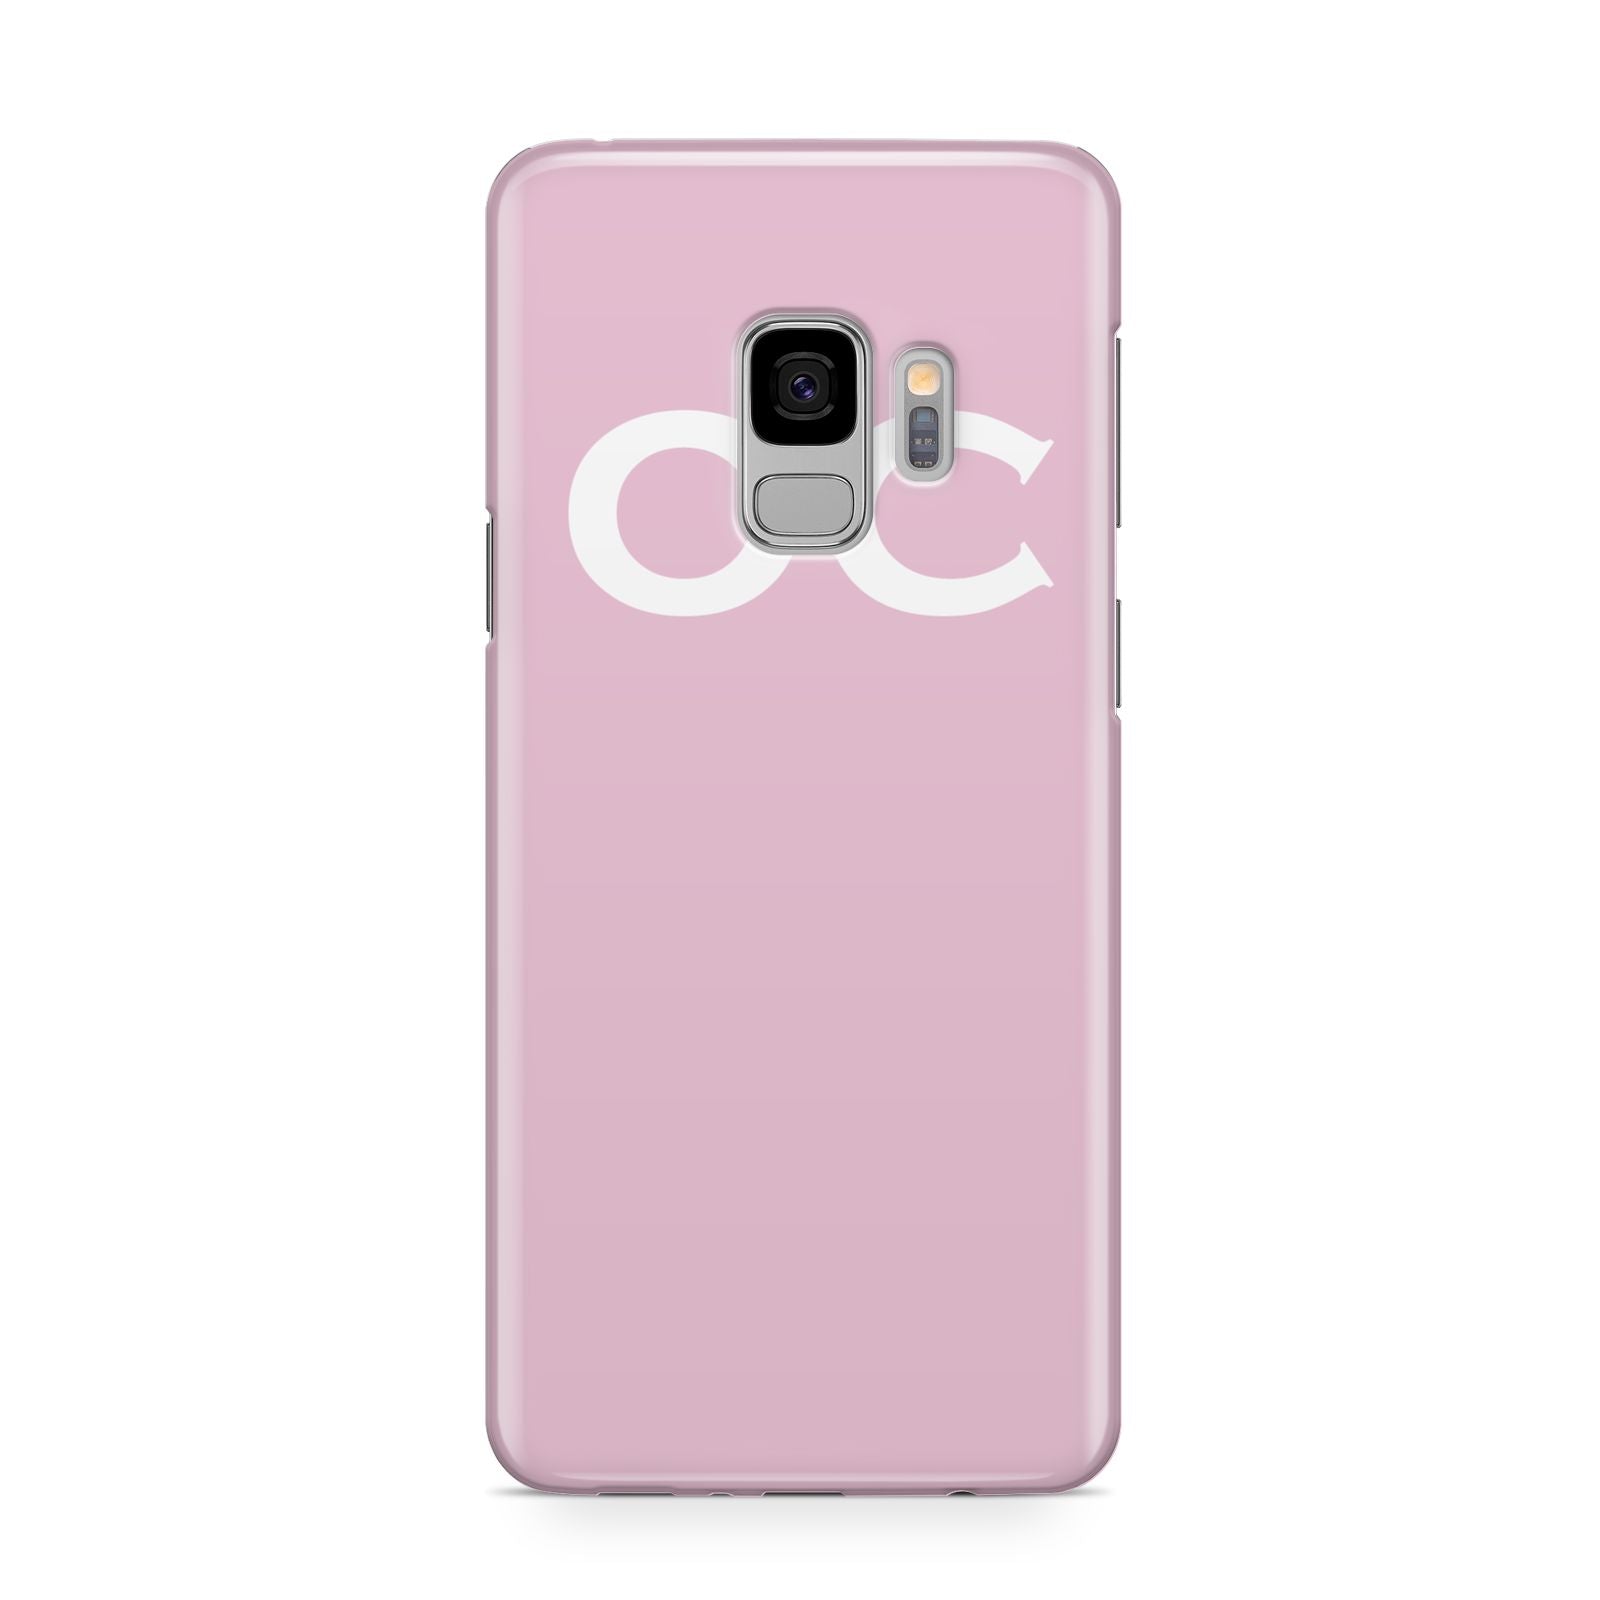 Personalised Initials 2 Samsung Galaxy S9 Case